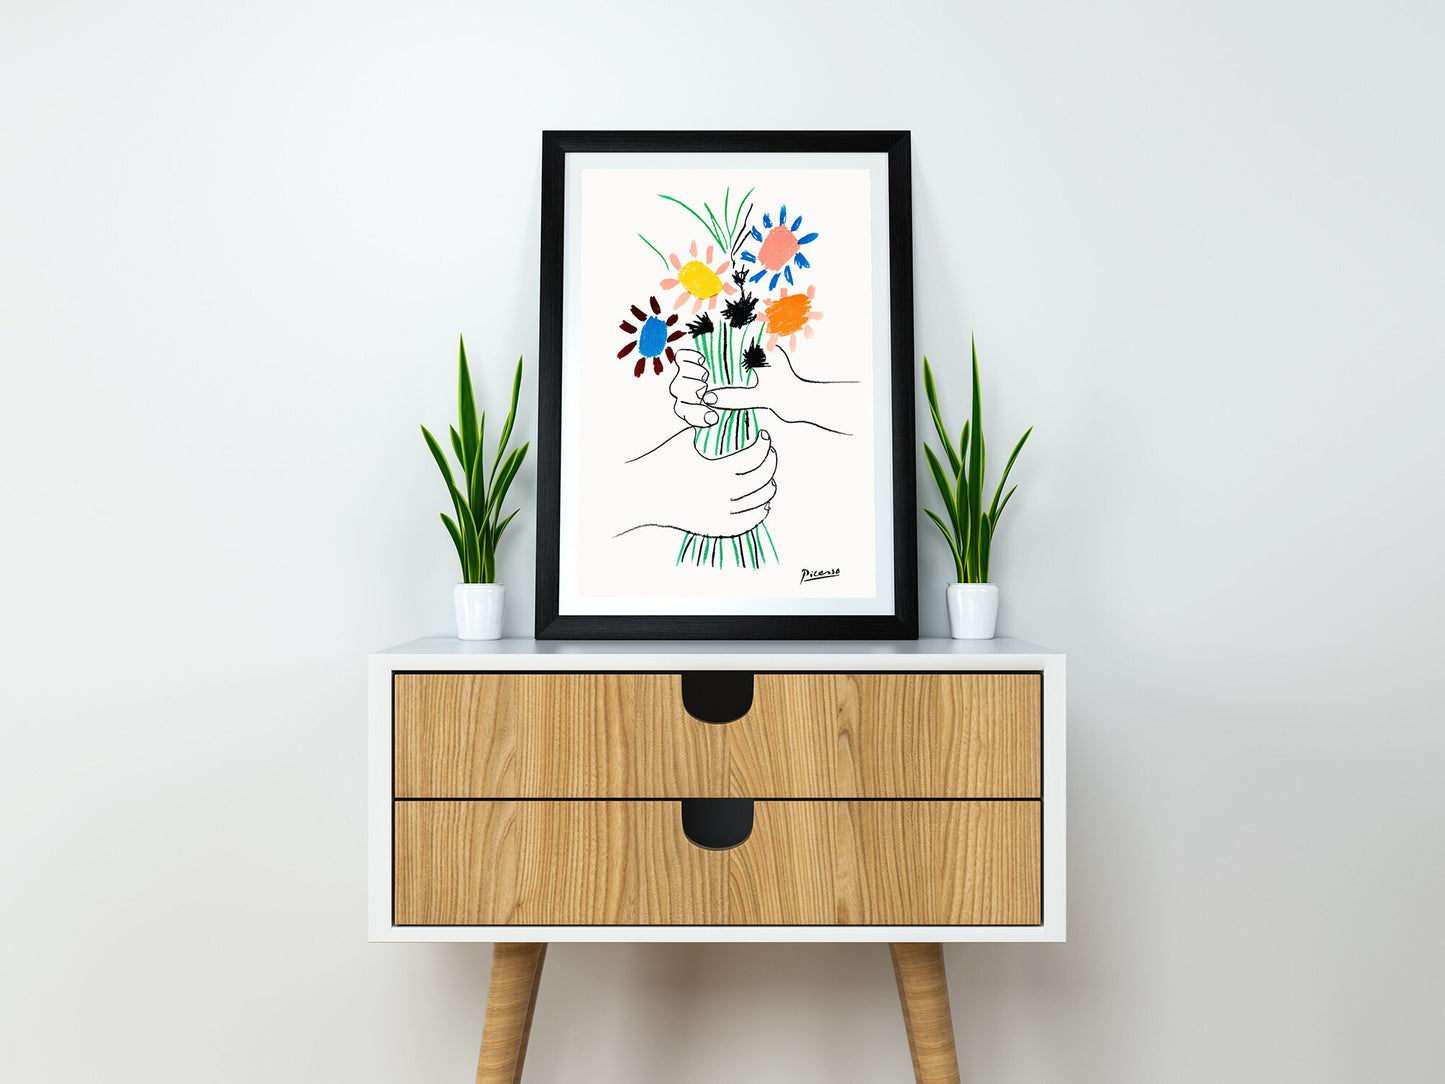 Picasso - Bouquet of Peace Flowers, Exhibition Vintage Line Art Poster, Minimalist Line Drawing, Ideal Home Decor or Gift Print